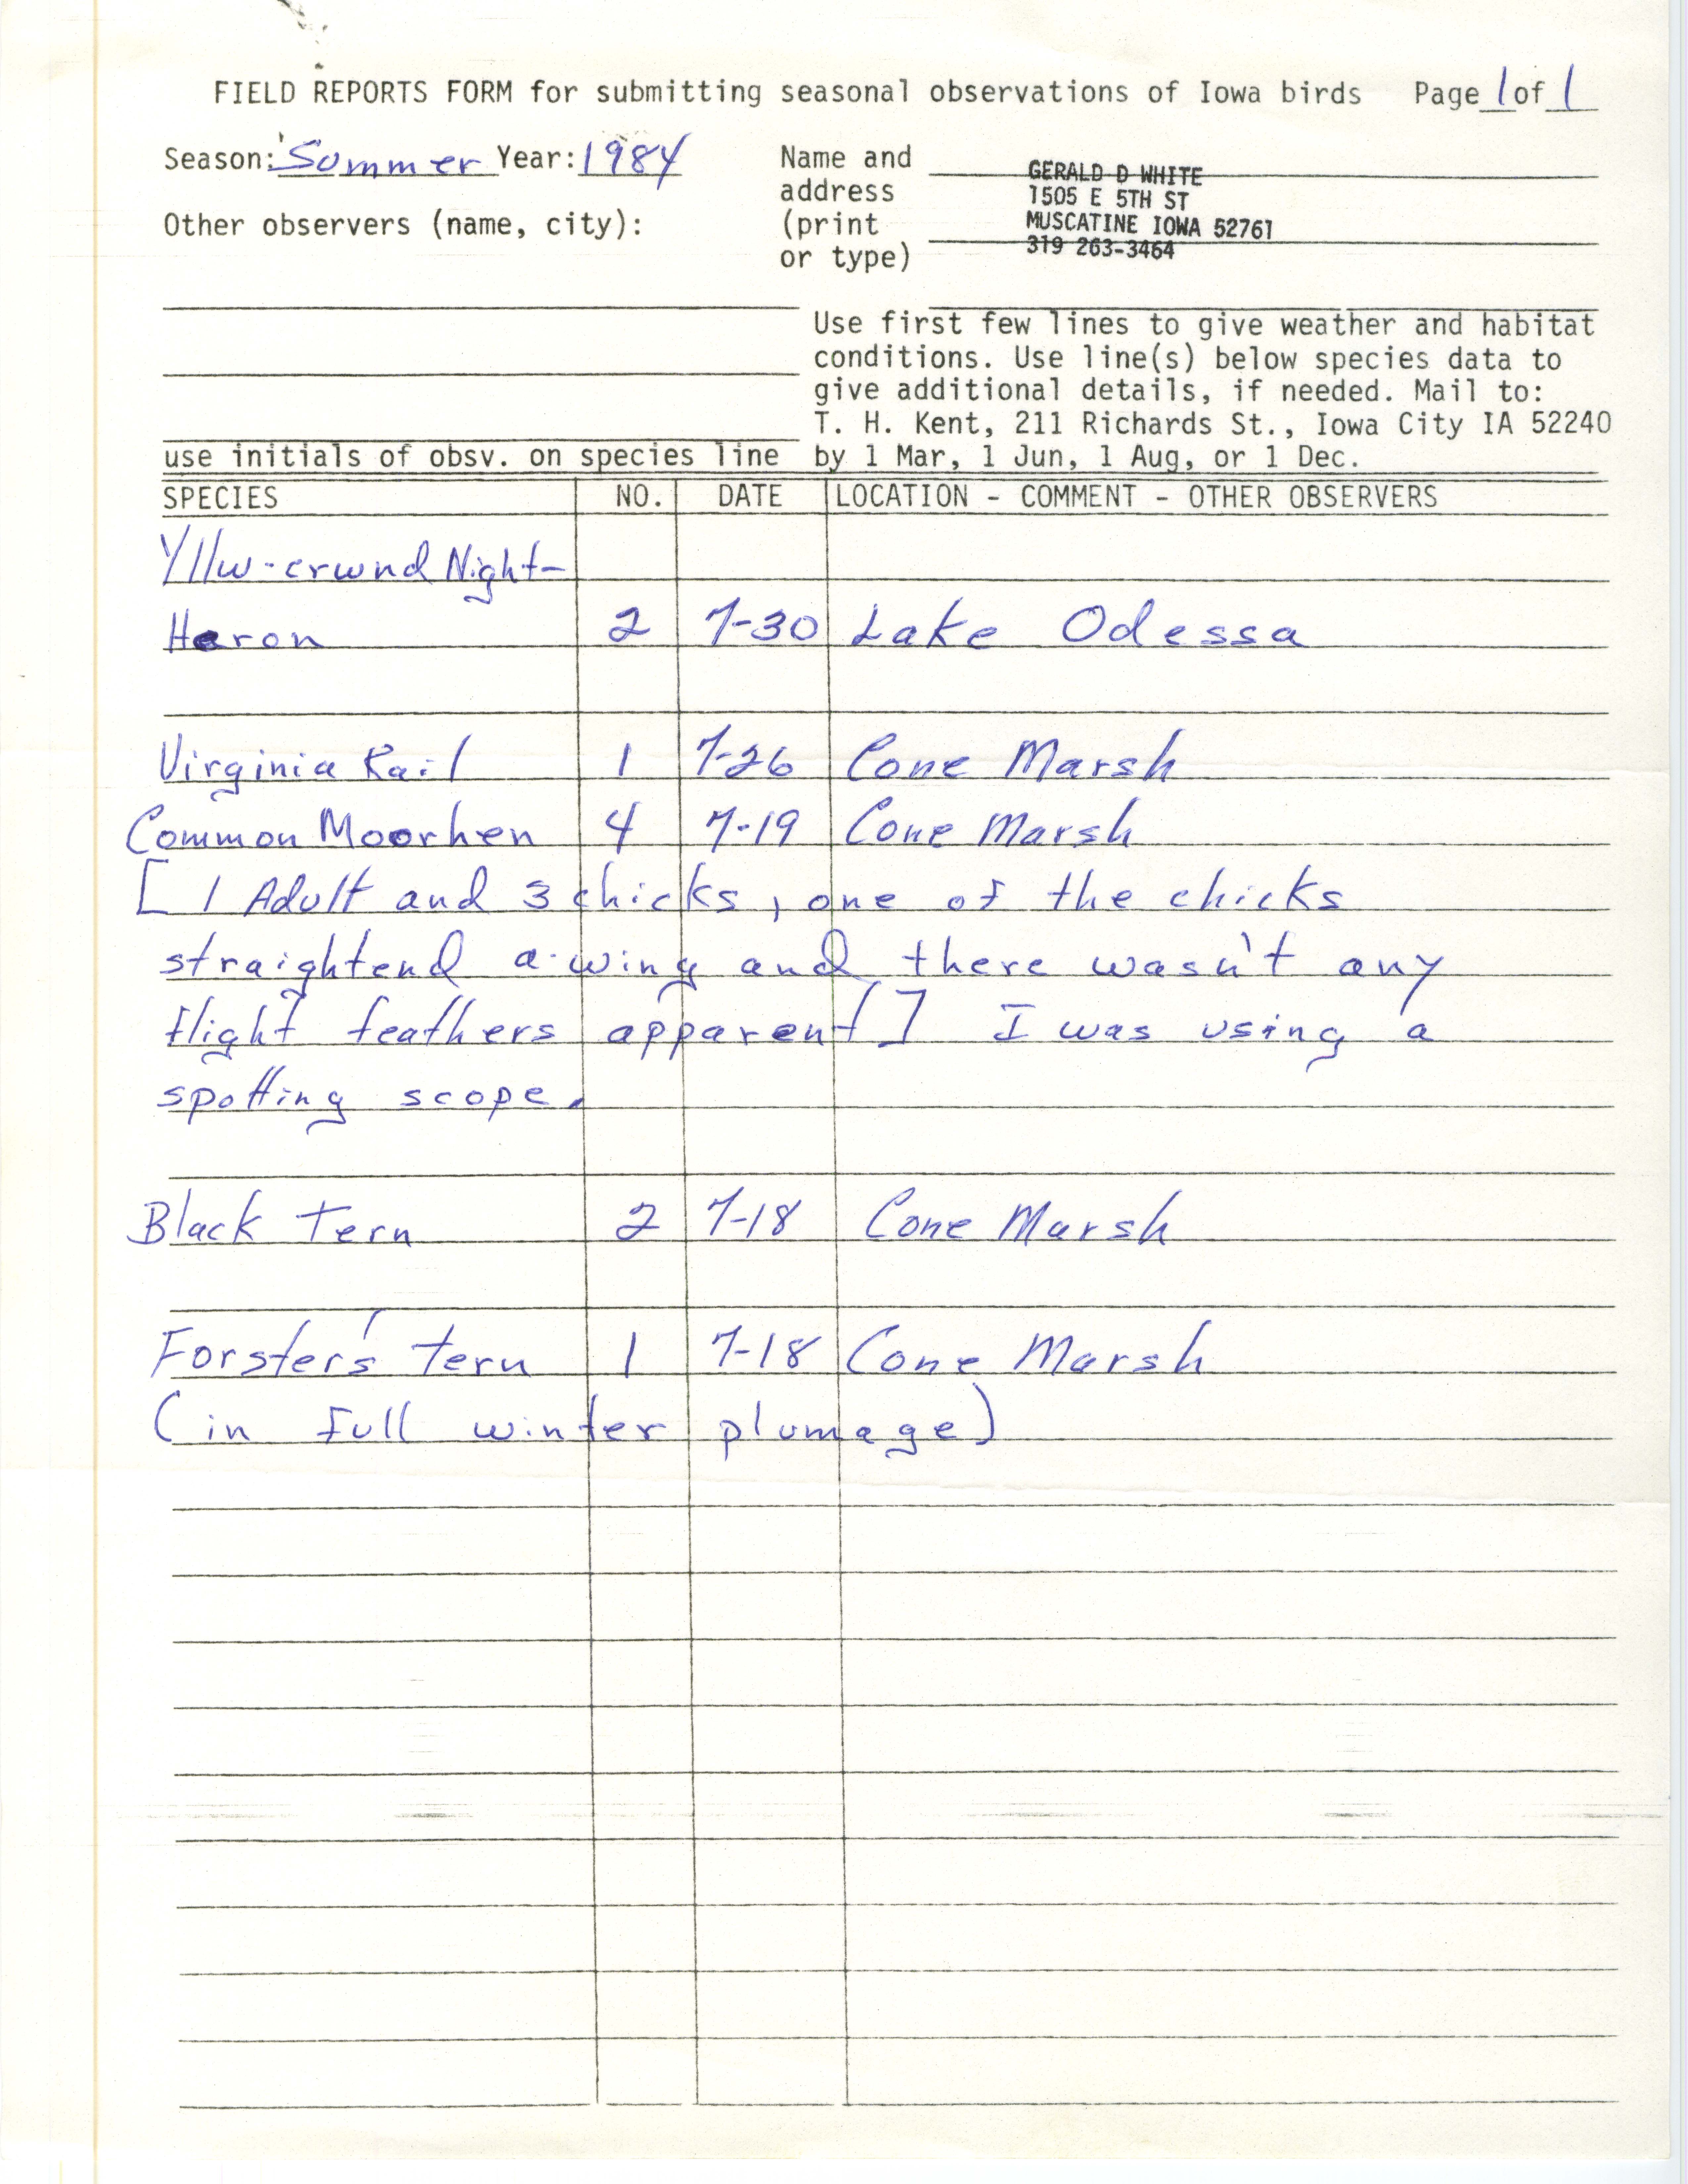 Field notes contributed by Gerald White, summer 1984